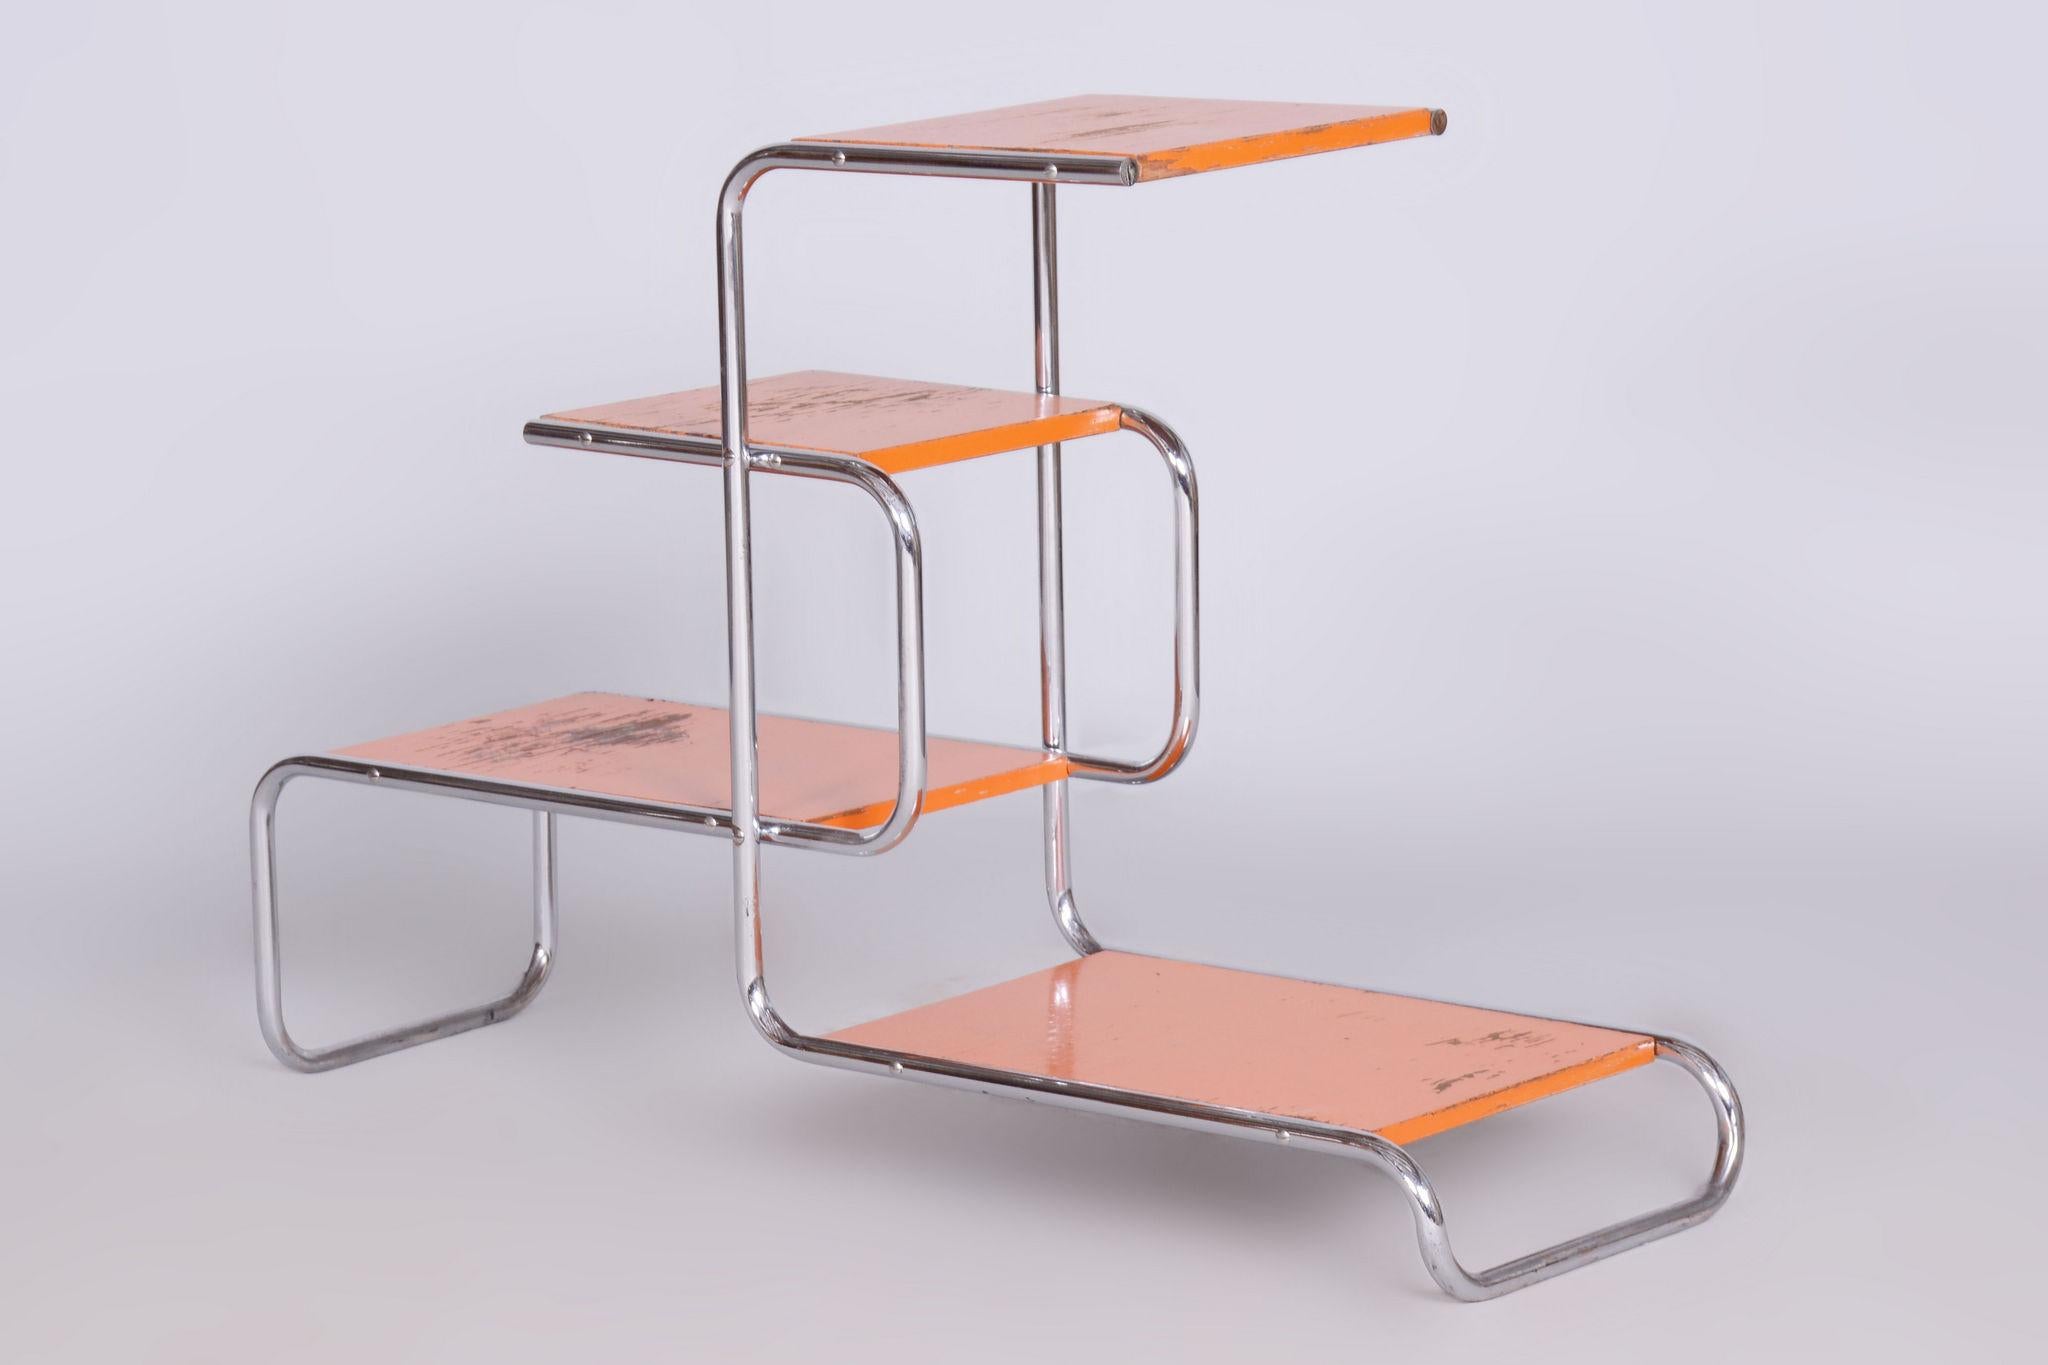 Restored Bauhaus Étagère, Chrome-Plated Steel, Lacquered Wood, Czechia, 1930s For Sale 1